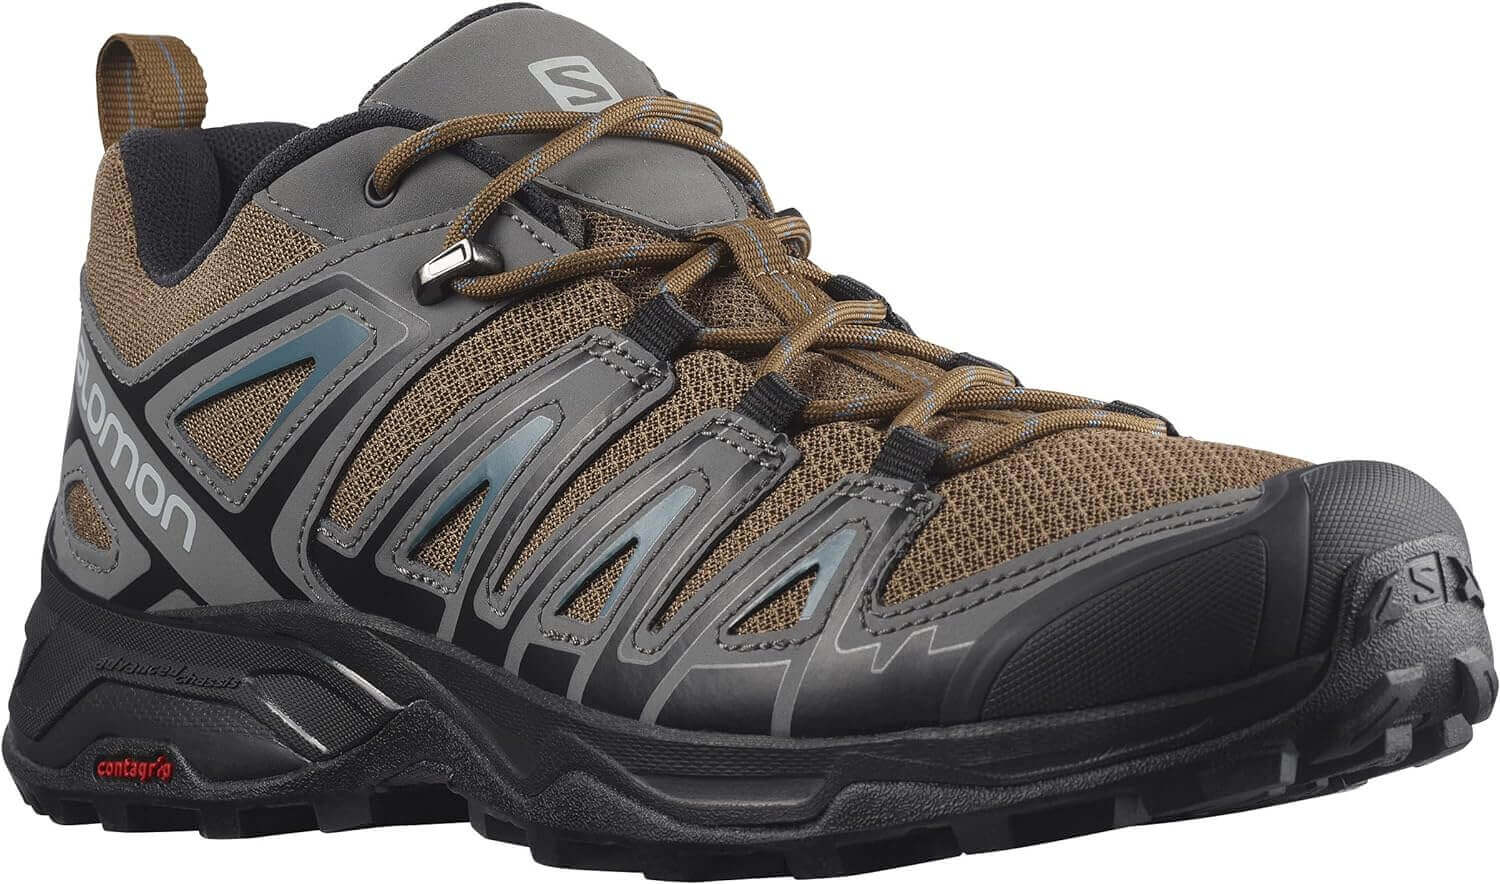 Shop The Latest >Salomon Men's X Ultra Pioneer Aero Hiking Shoes > *Only $110.43*> From The Top Brand > *Salomonl* > Shop Now and Get Free Shipping On Orders Over $45.00 >*Shop Earth Foot*